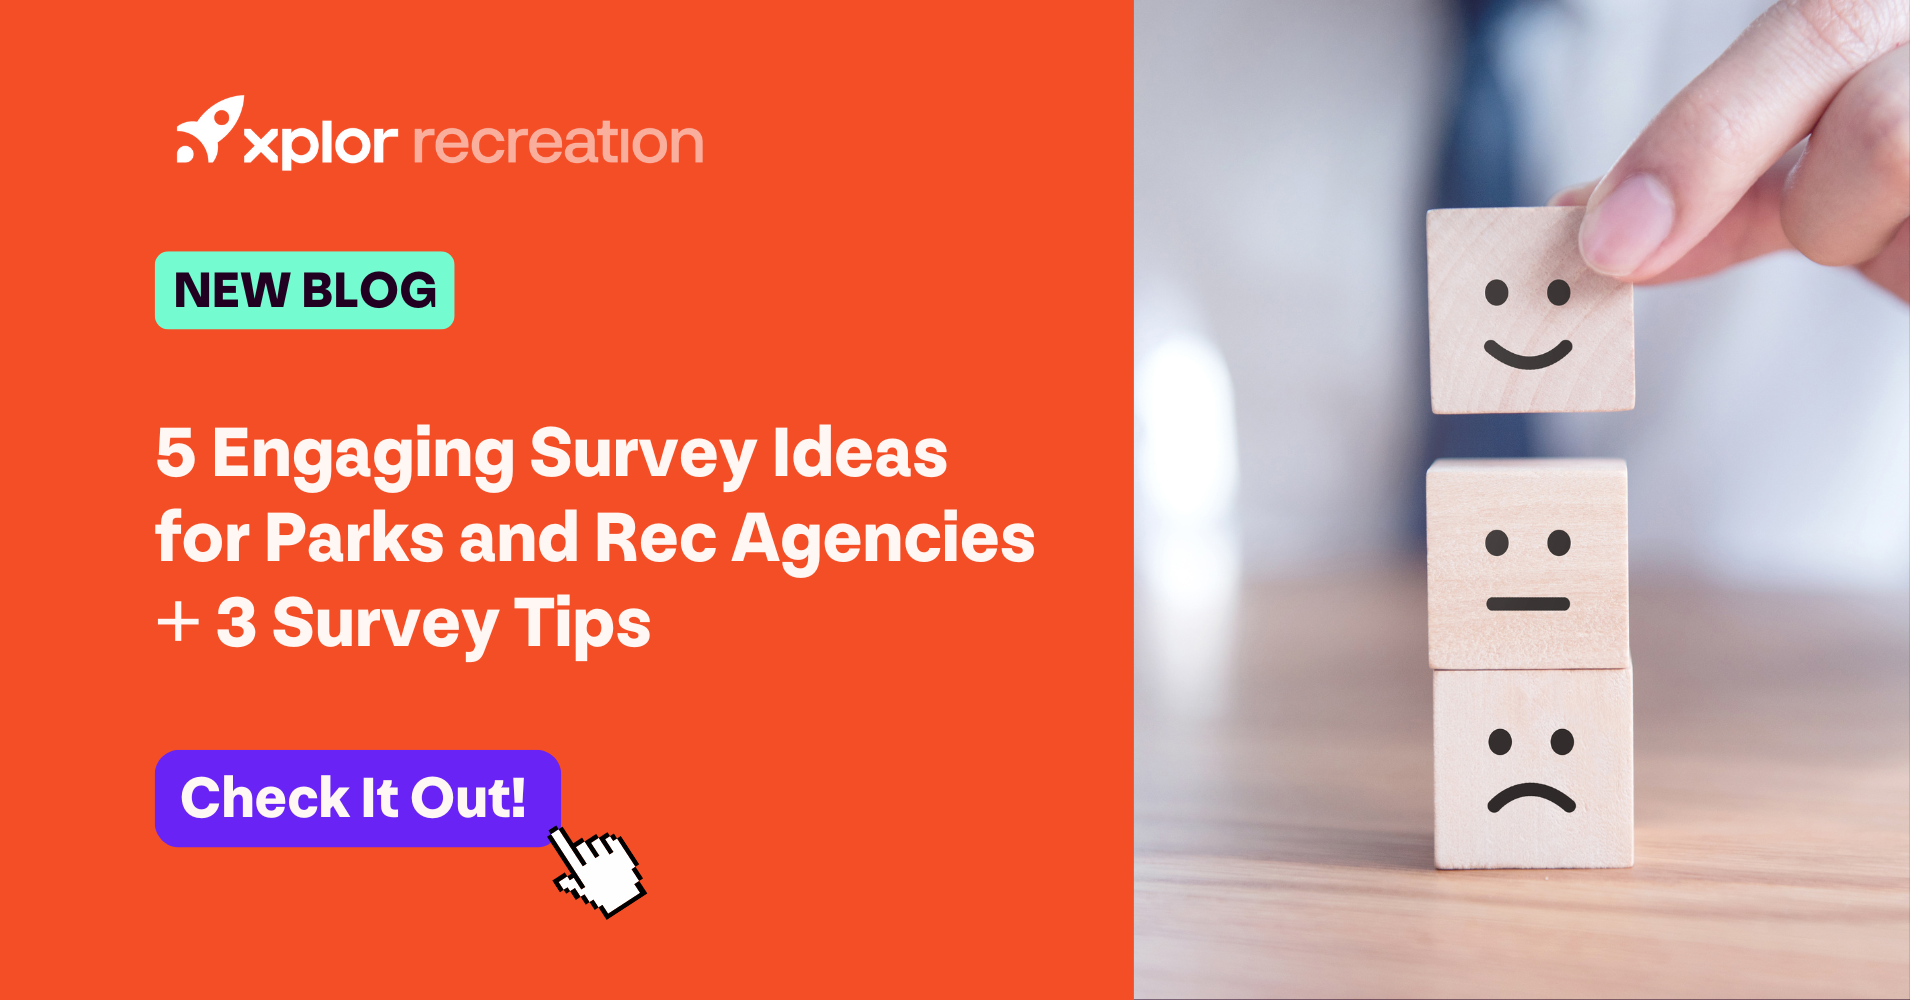 5 Engaging Survey Ideas for Parks and Recreation Agencies + 3 Survey Tips